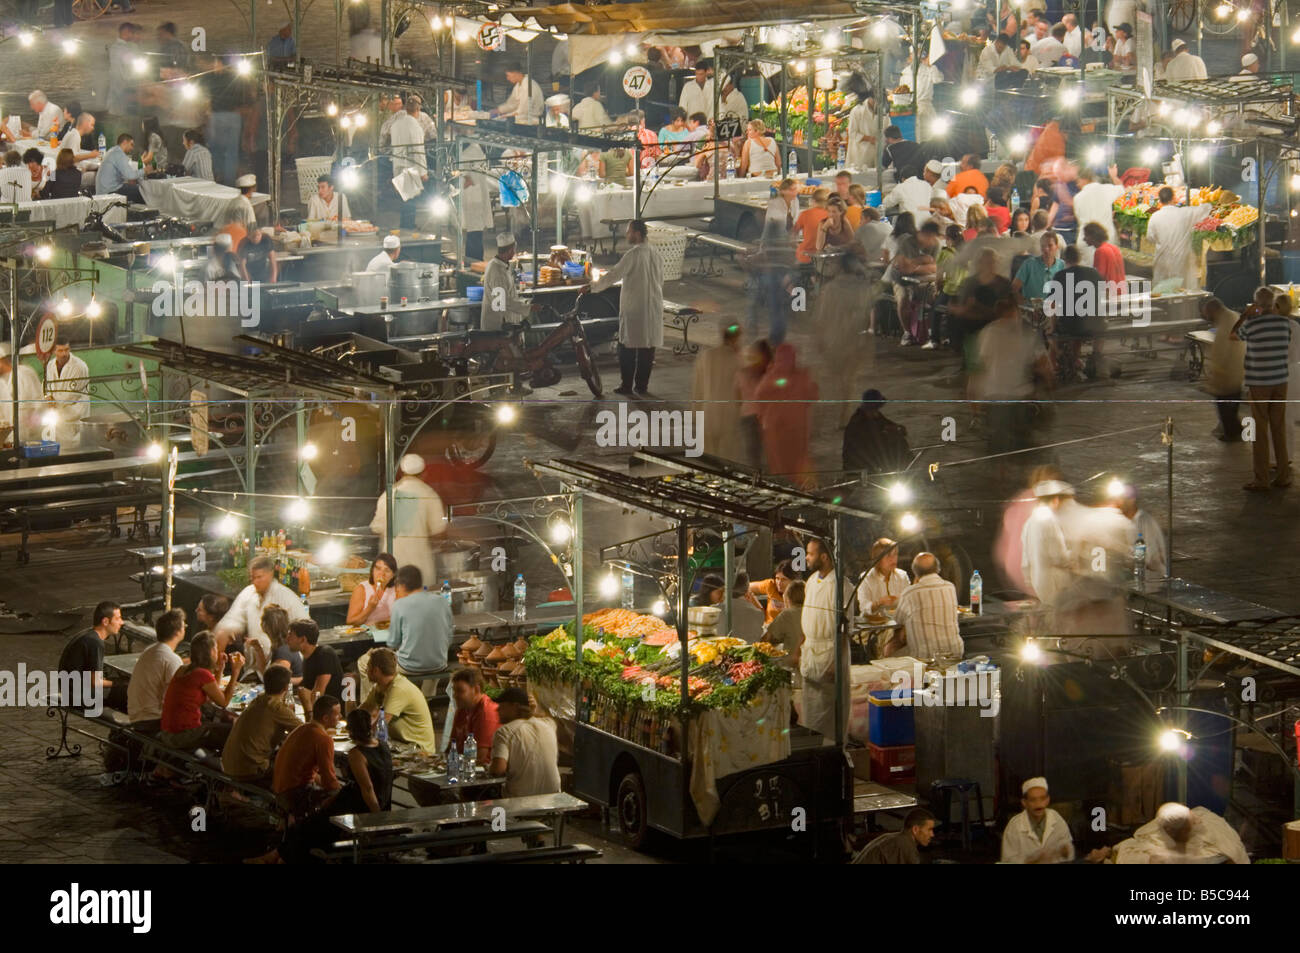 A compressed perspective aerial view of the open air 'restaurants' at the Djemaa El Fna with slow shutter speed for motion blur. Stock Photo